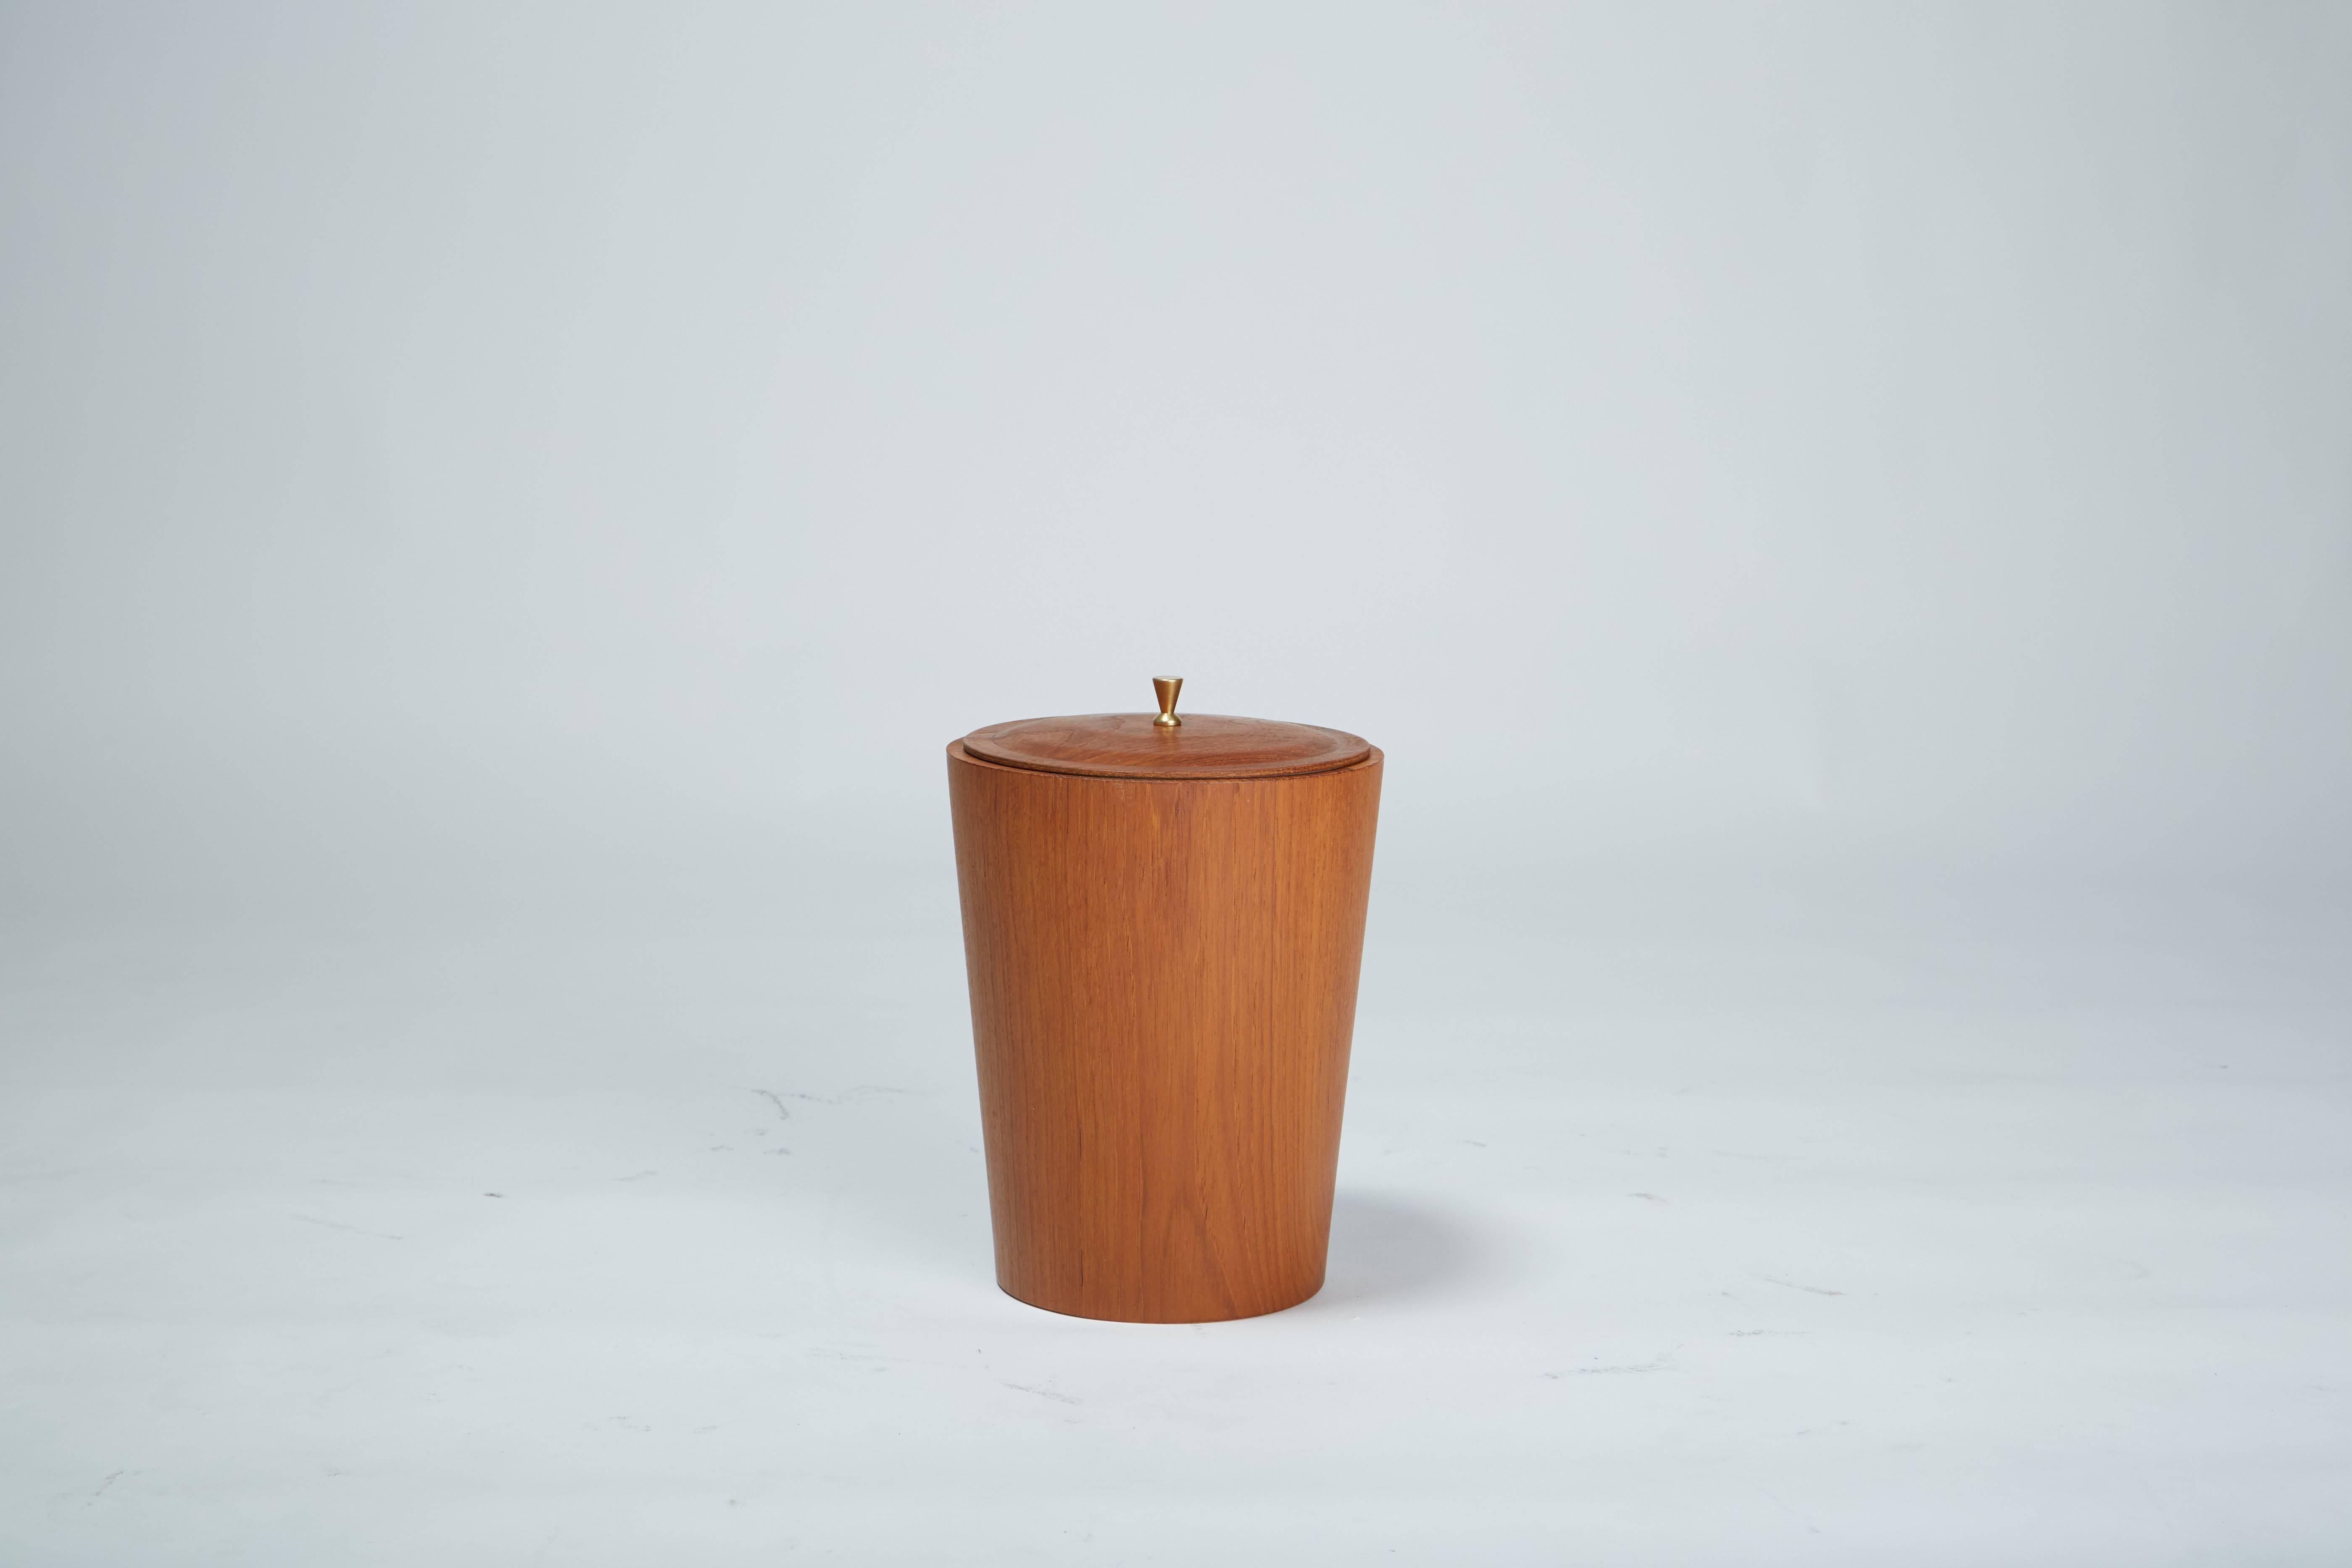 Swedish design house rainbow wood products specialized in streamlined home and office accessories in teak veneer. This example is an ice bucket with a delicately flared conical shape. The white plastic interior sleeve lifts easily out for cleaning.